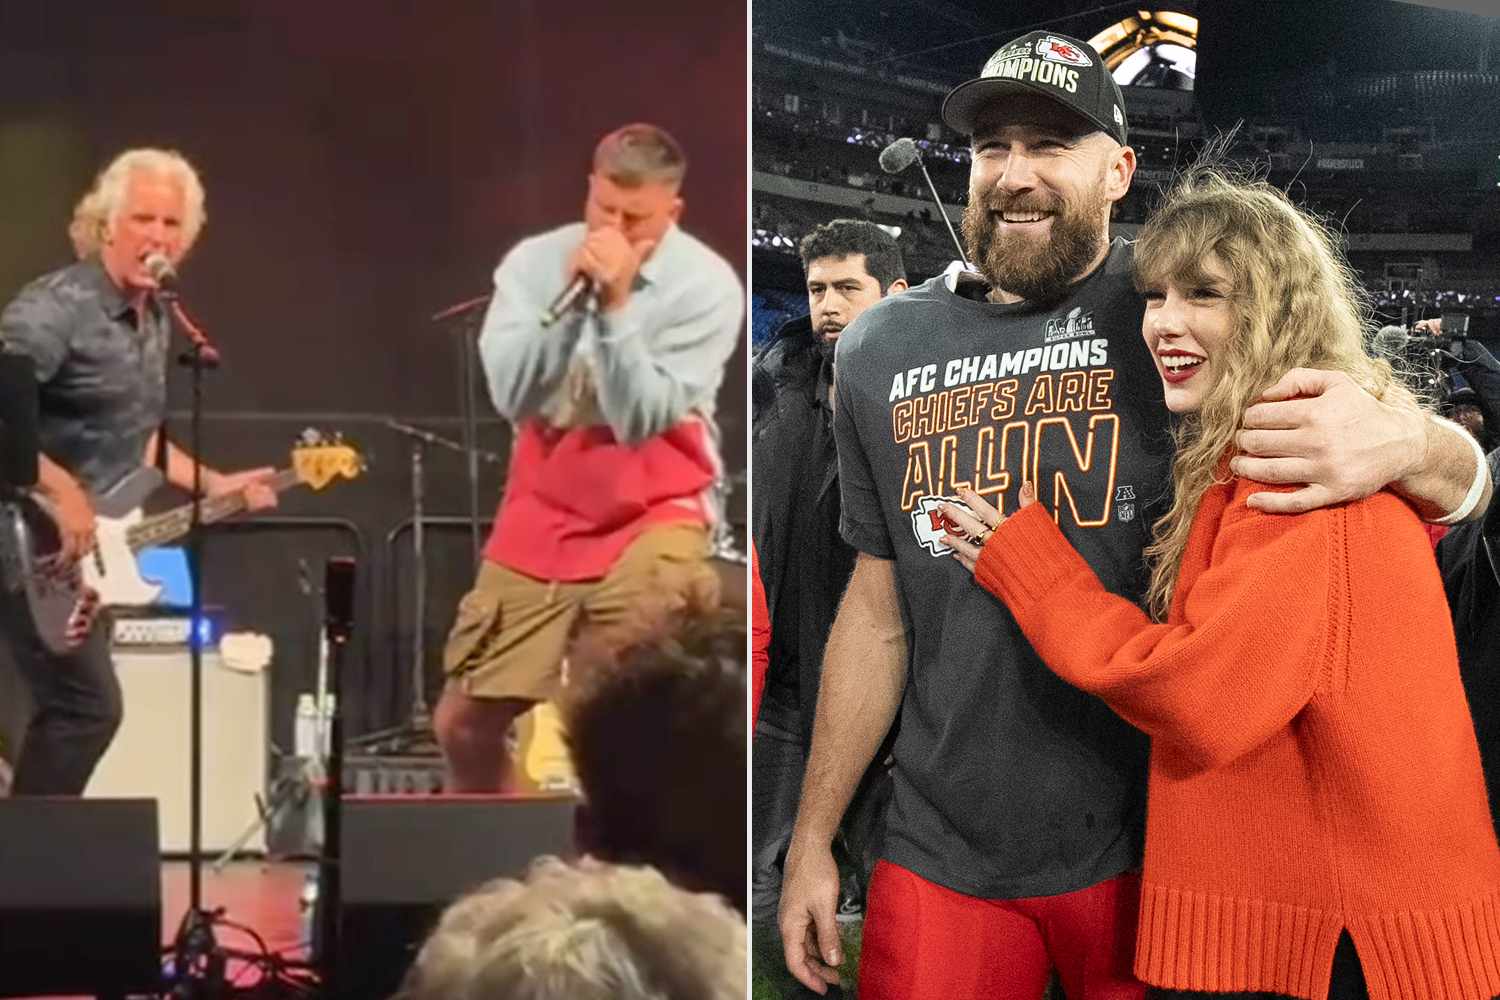 Travis Kelce Says ‘Taylor, This Is for You' as He Takes Home Karaoke Award After Belting Out Whitesnake